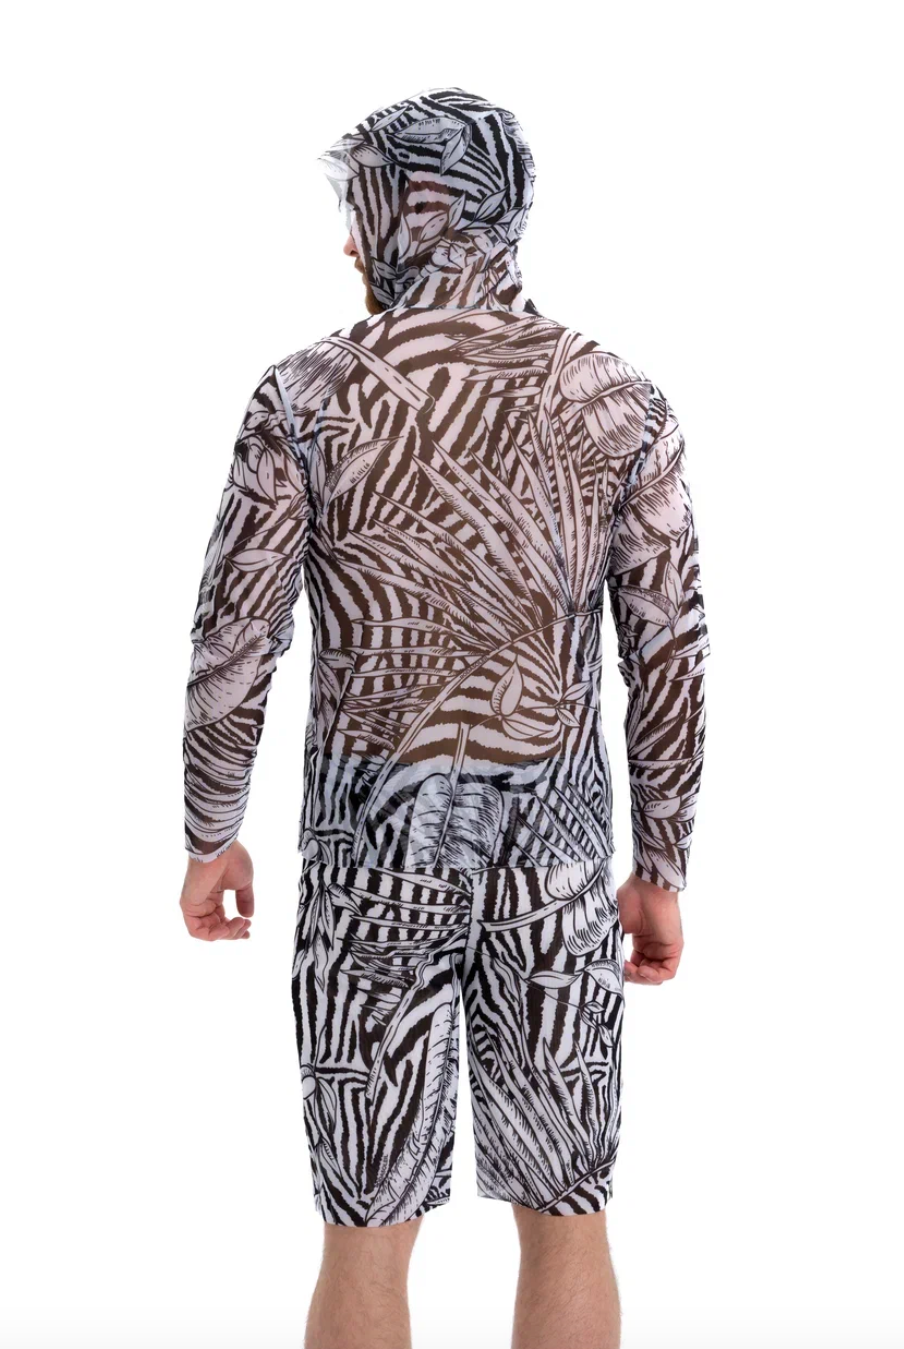 Explore our sustainable men's swimwear collection featuring a Zebra print beach t-shirt with a hood and SPF35 protection. Designed for classic luxury and eco-friendly style, it offers both comfort and sun protection